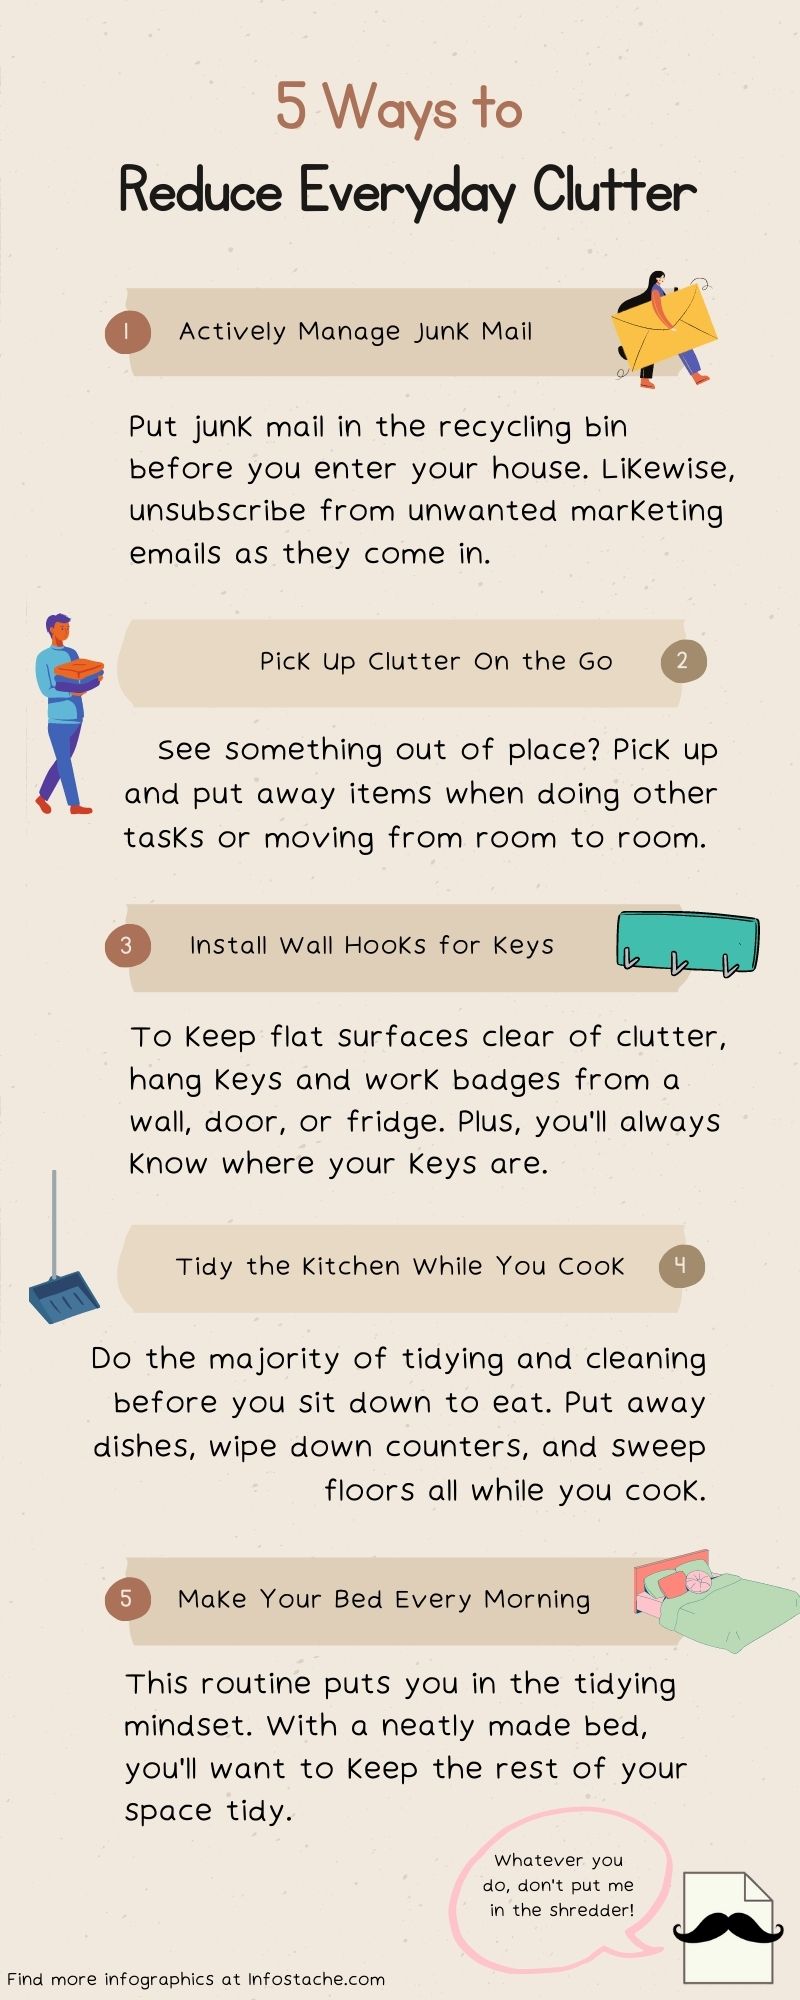 5 ways to reduce everyday clutter infographic